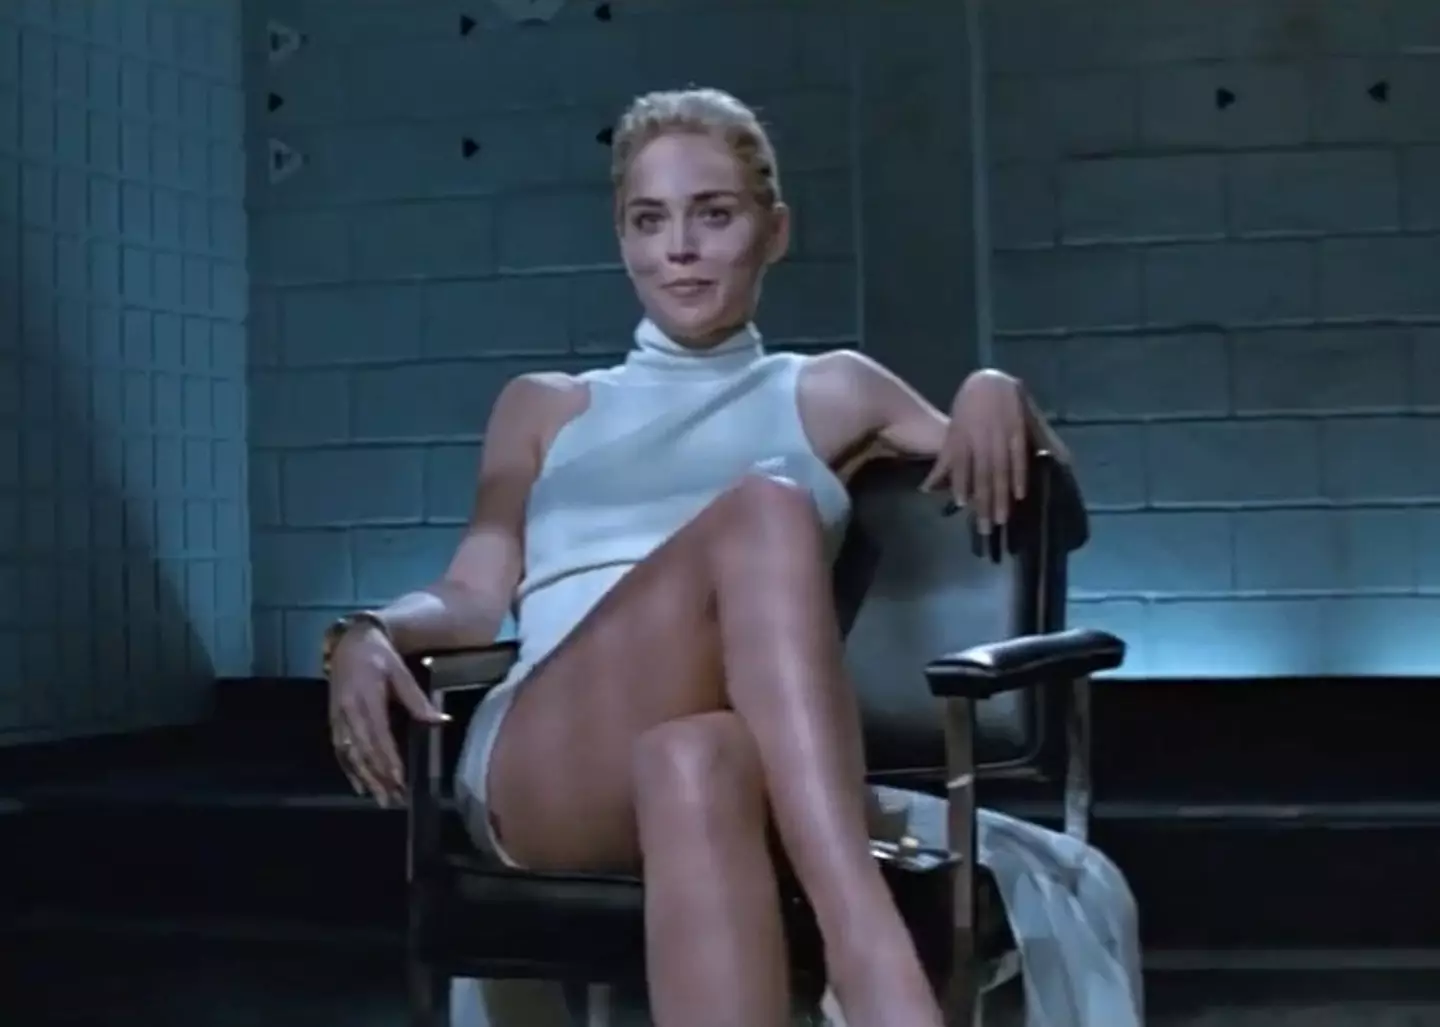 Sharon Stone says Basic Instinct was partly to blame for her losing custody of her son.